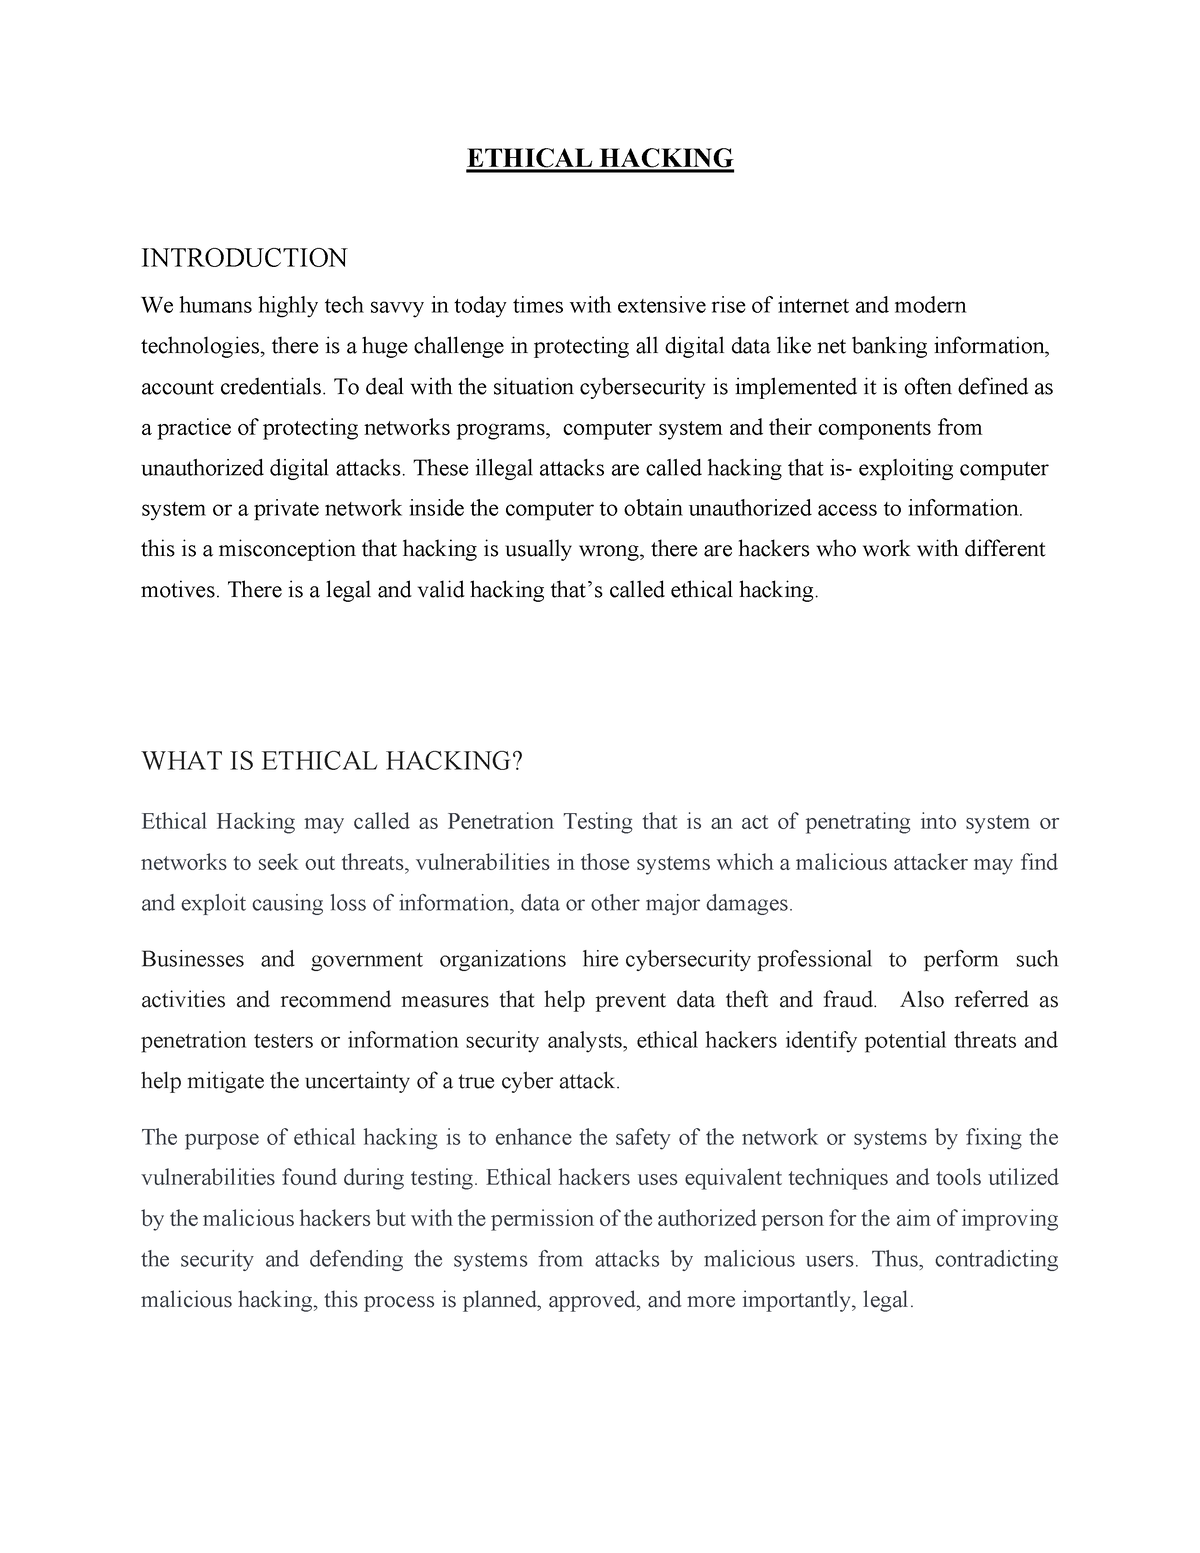 ethical hacking essay